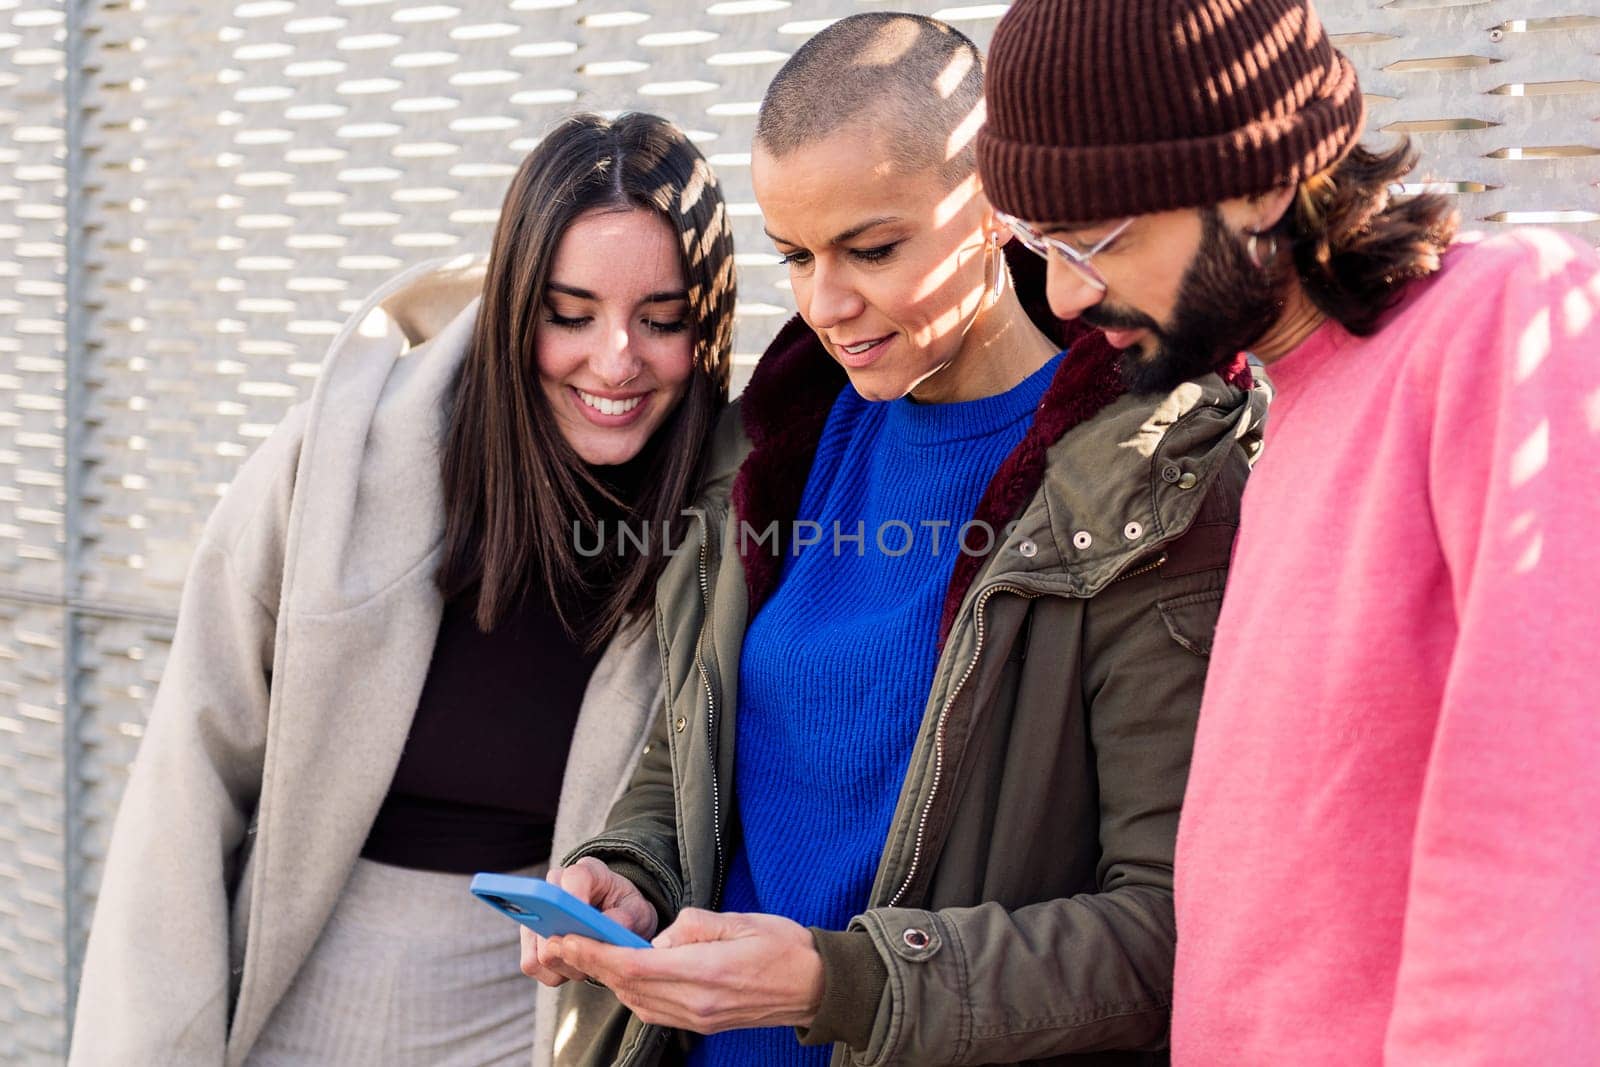 three young friends enjoying the moment using together a mobile phone, concept of technology of communication and modern lifestyle